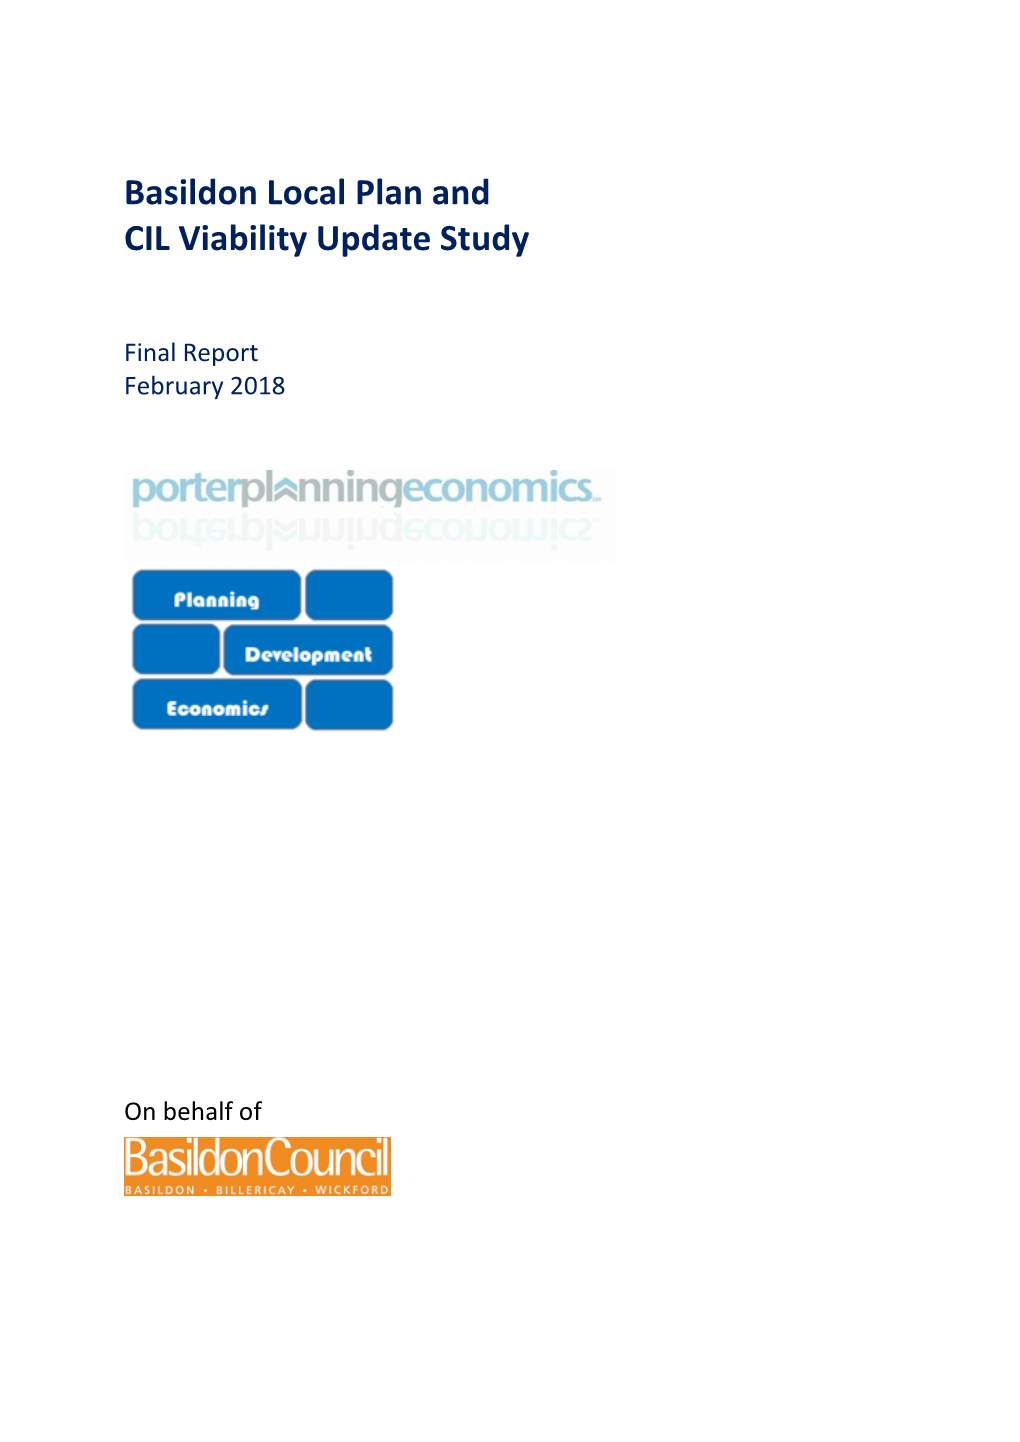 Basildon Local Plan and CIL Viability Update Study